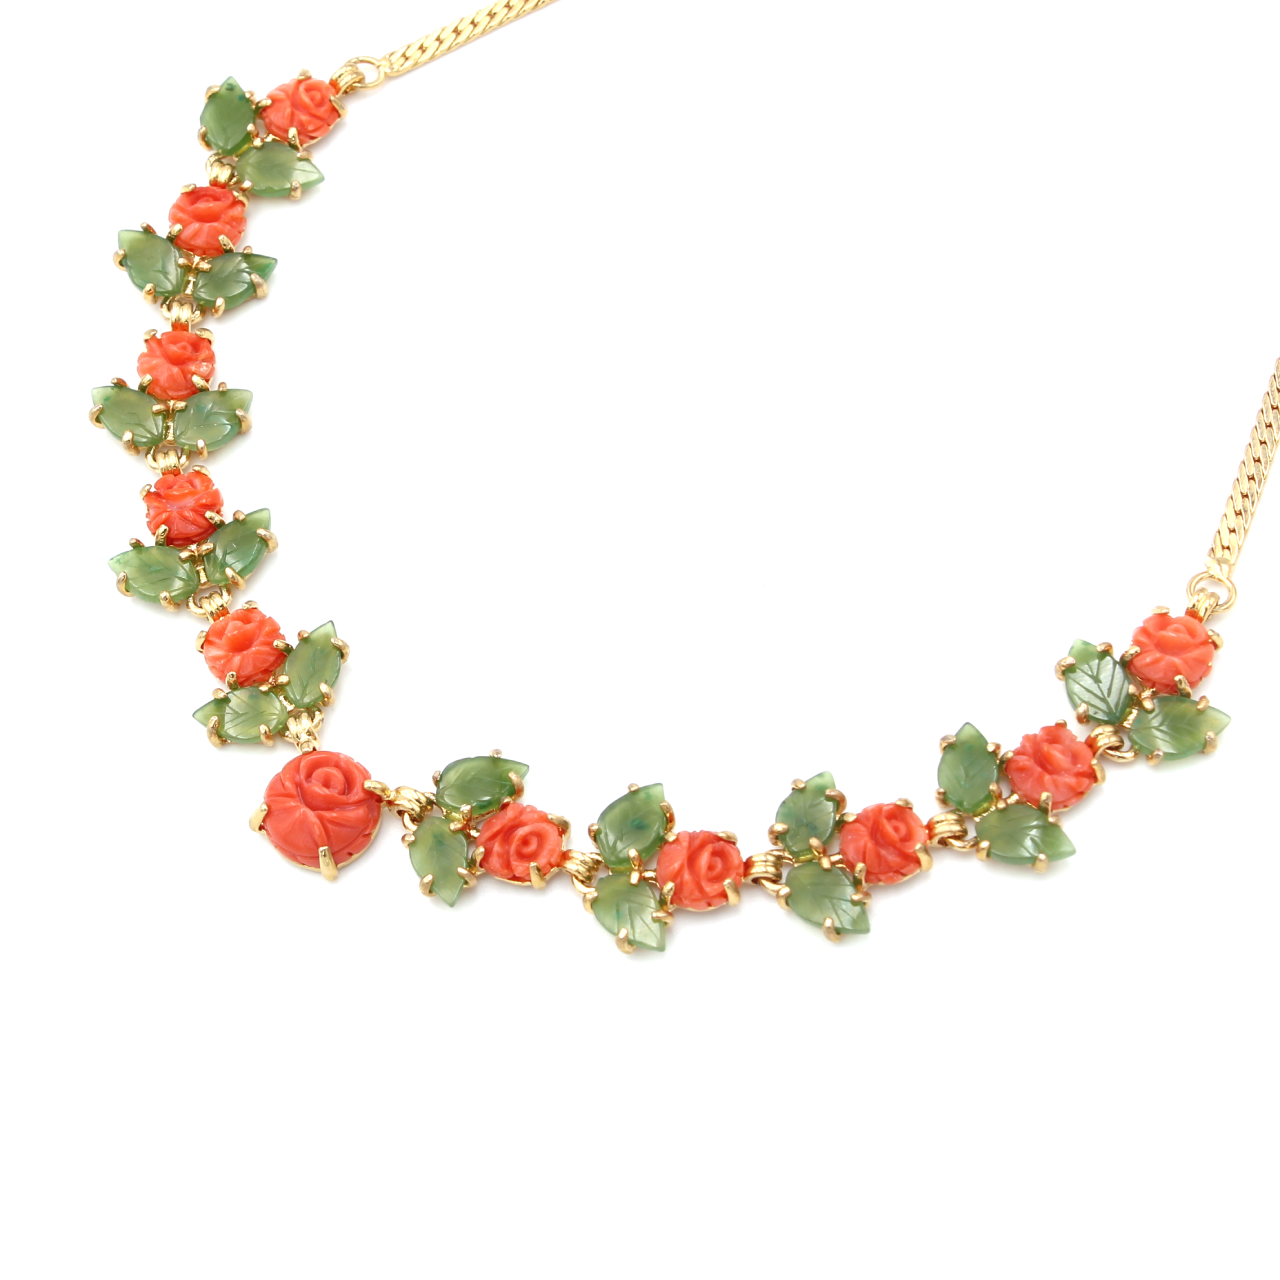 Chinese Carved Coral Necklace | Coral necklace, Coral, Coral jewelry